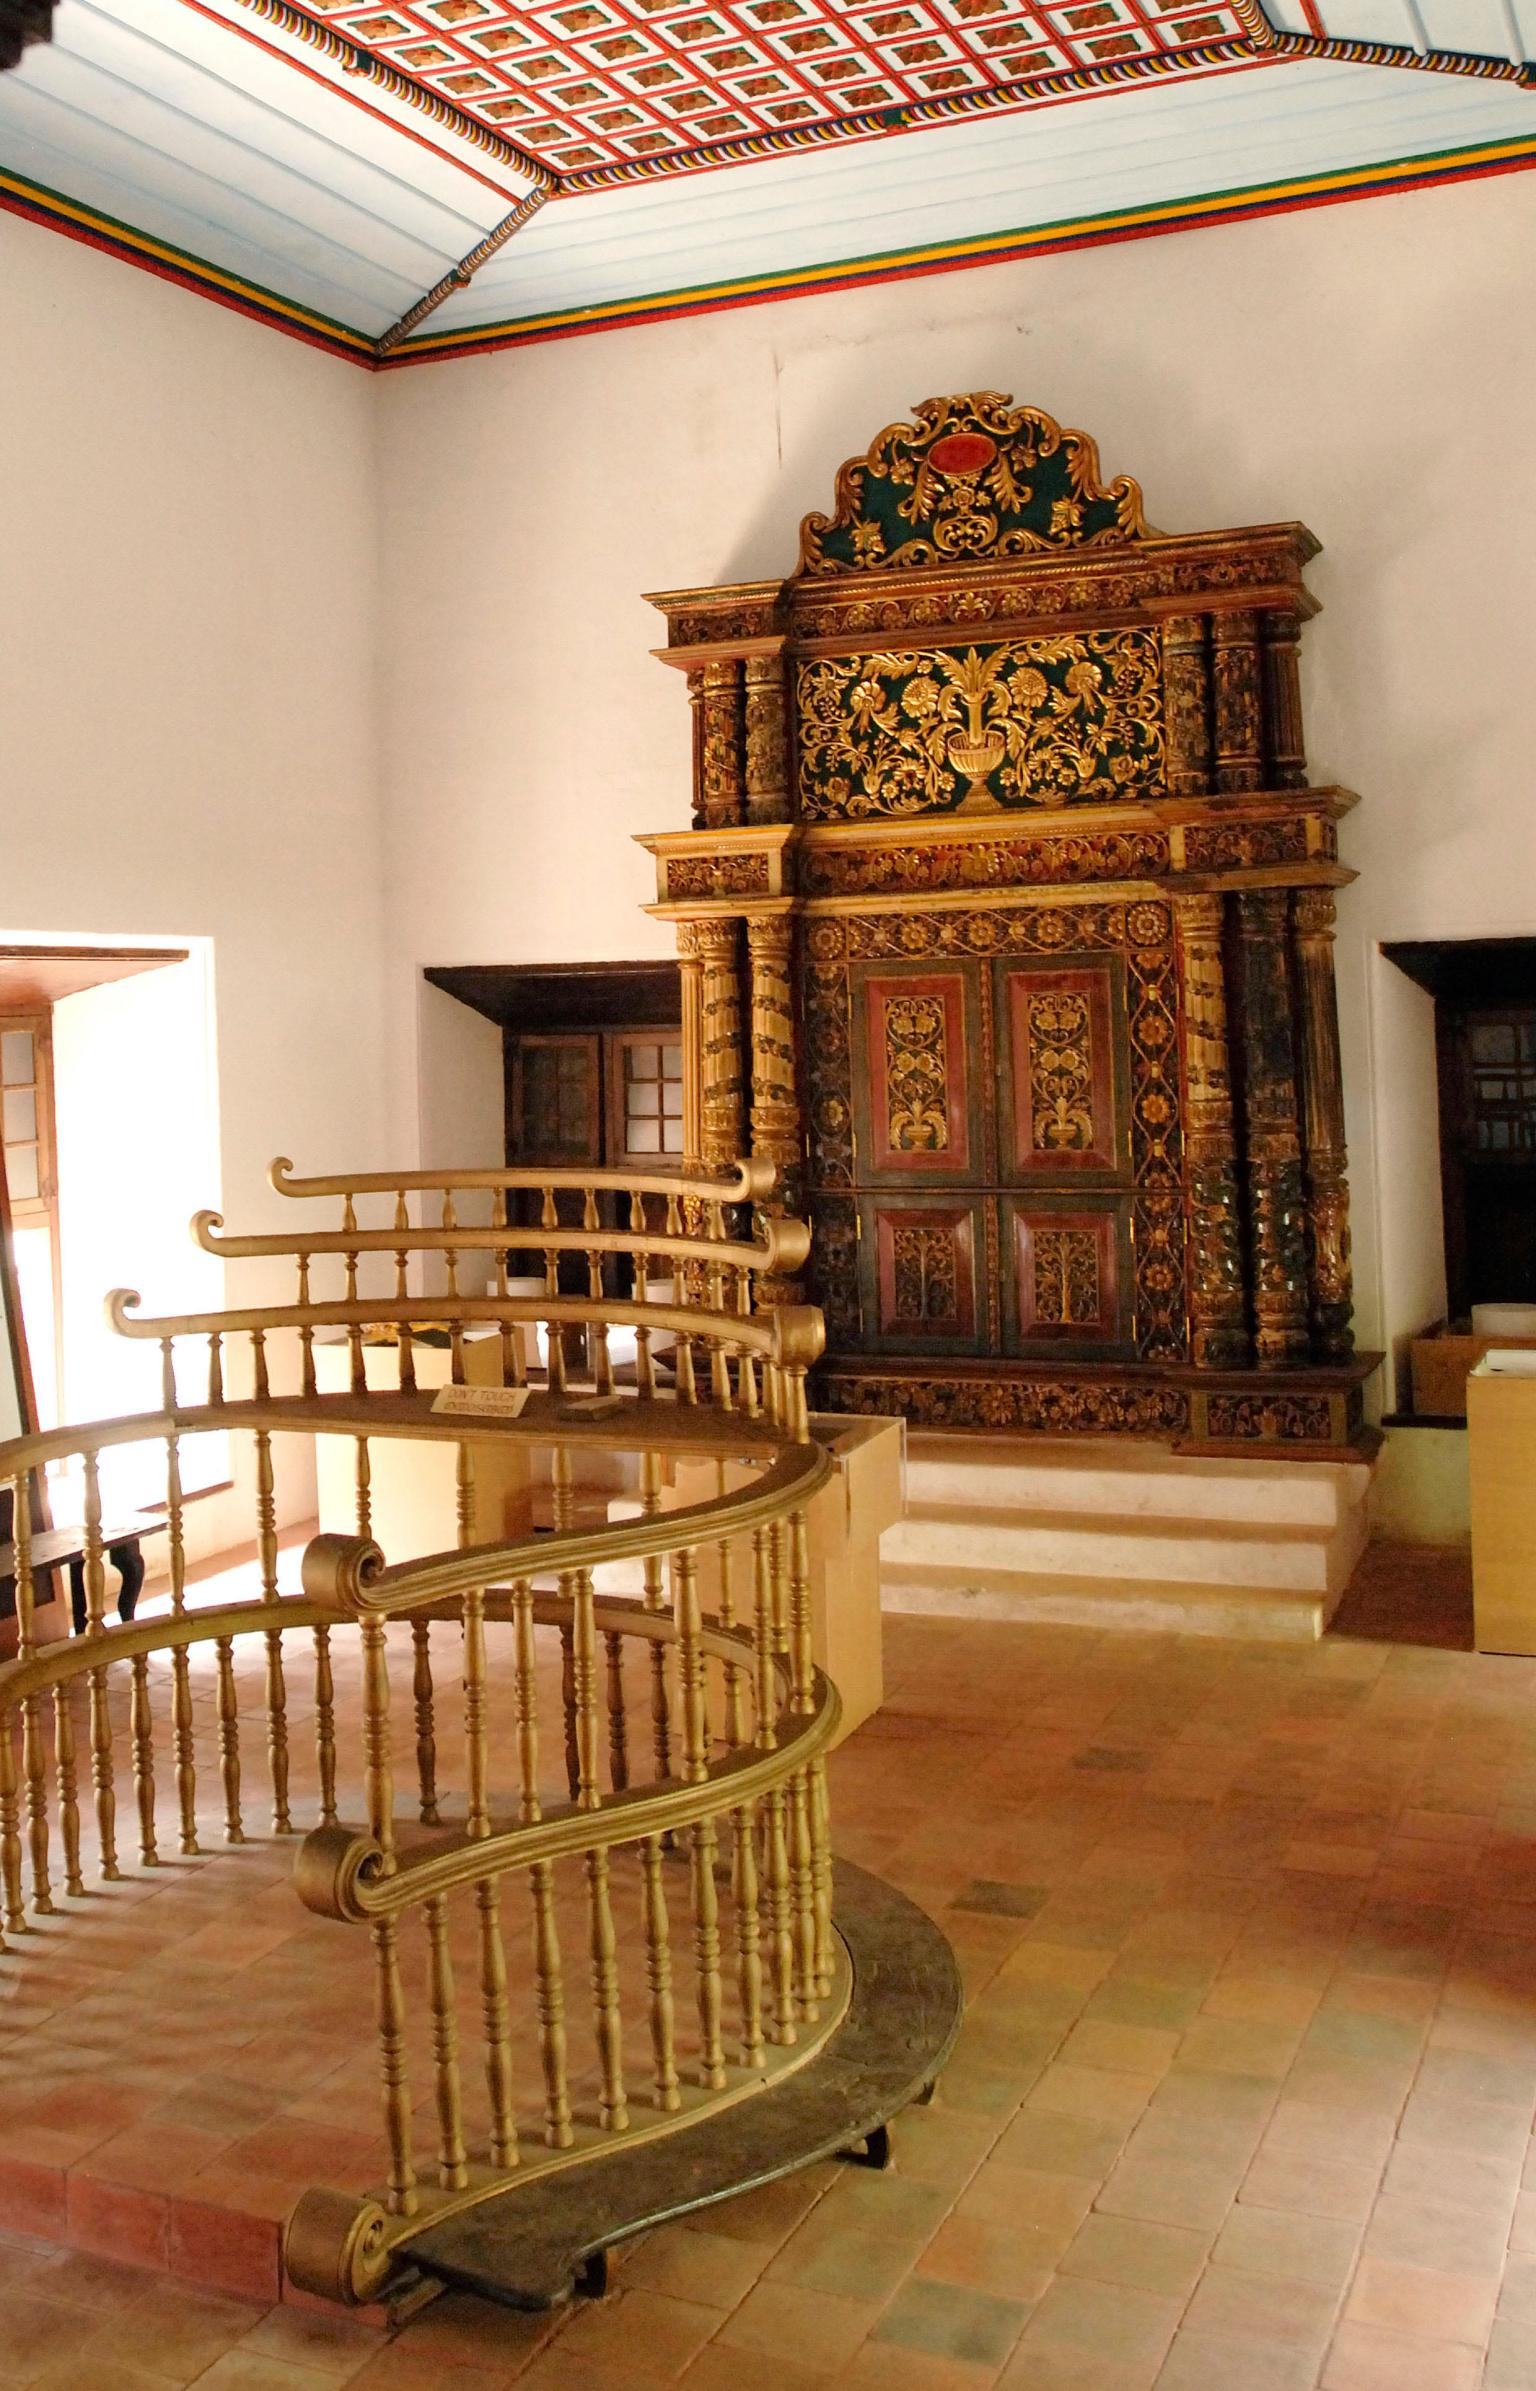 Photograph of room with raised platform with railings in center and carved wooden Torah chamber on back wall.  